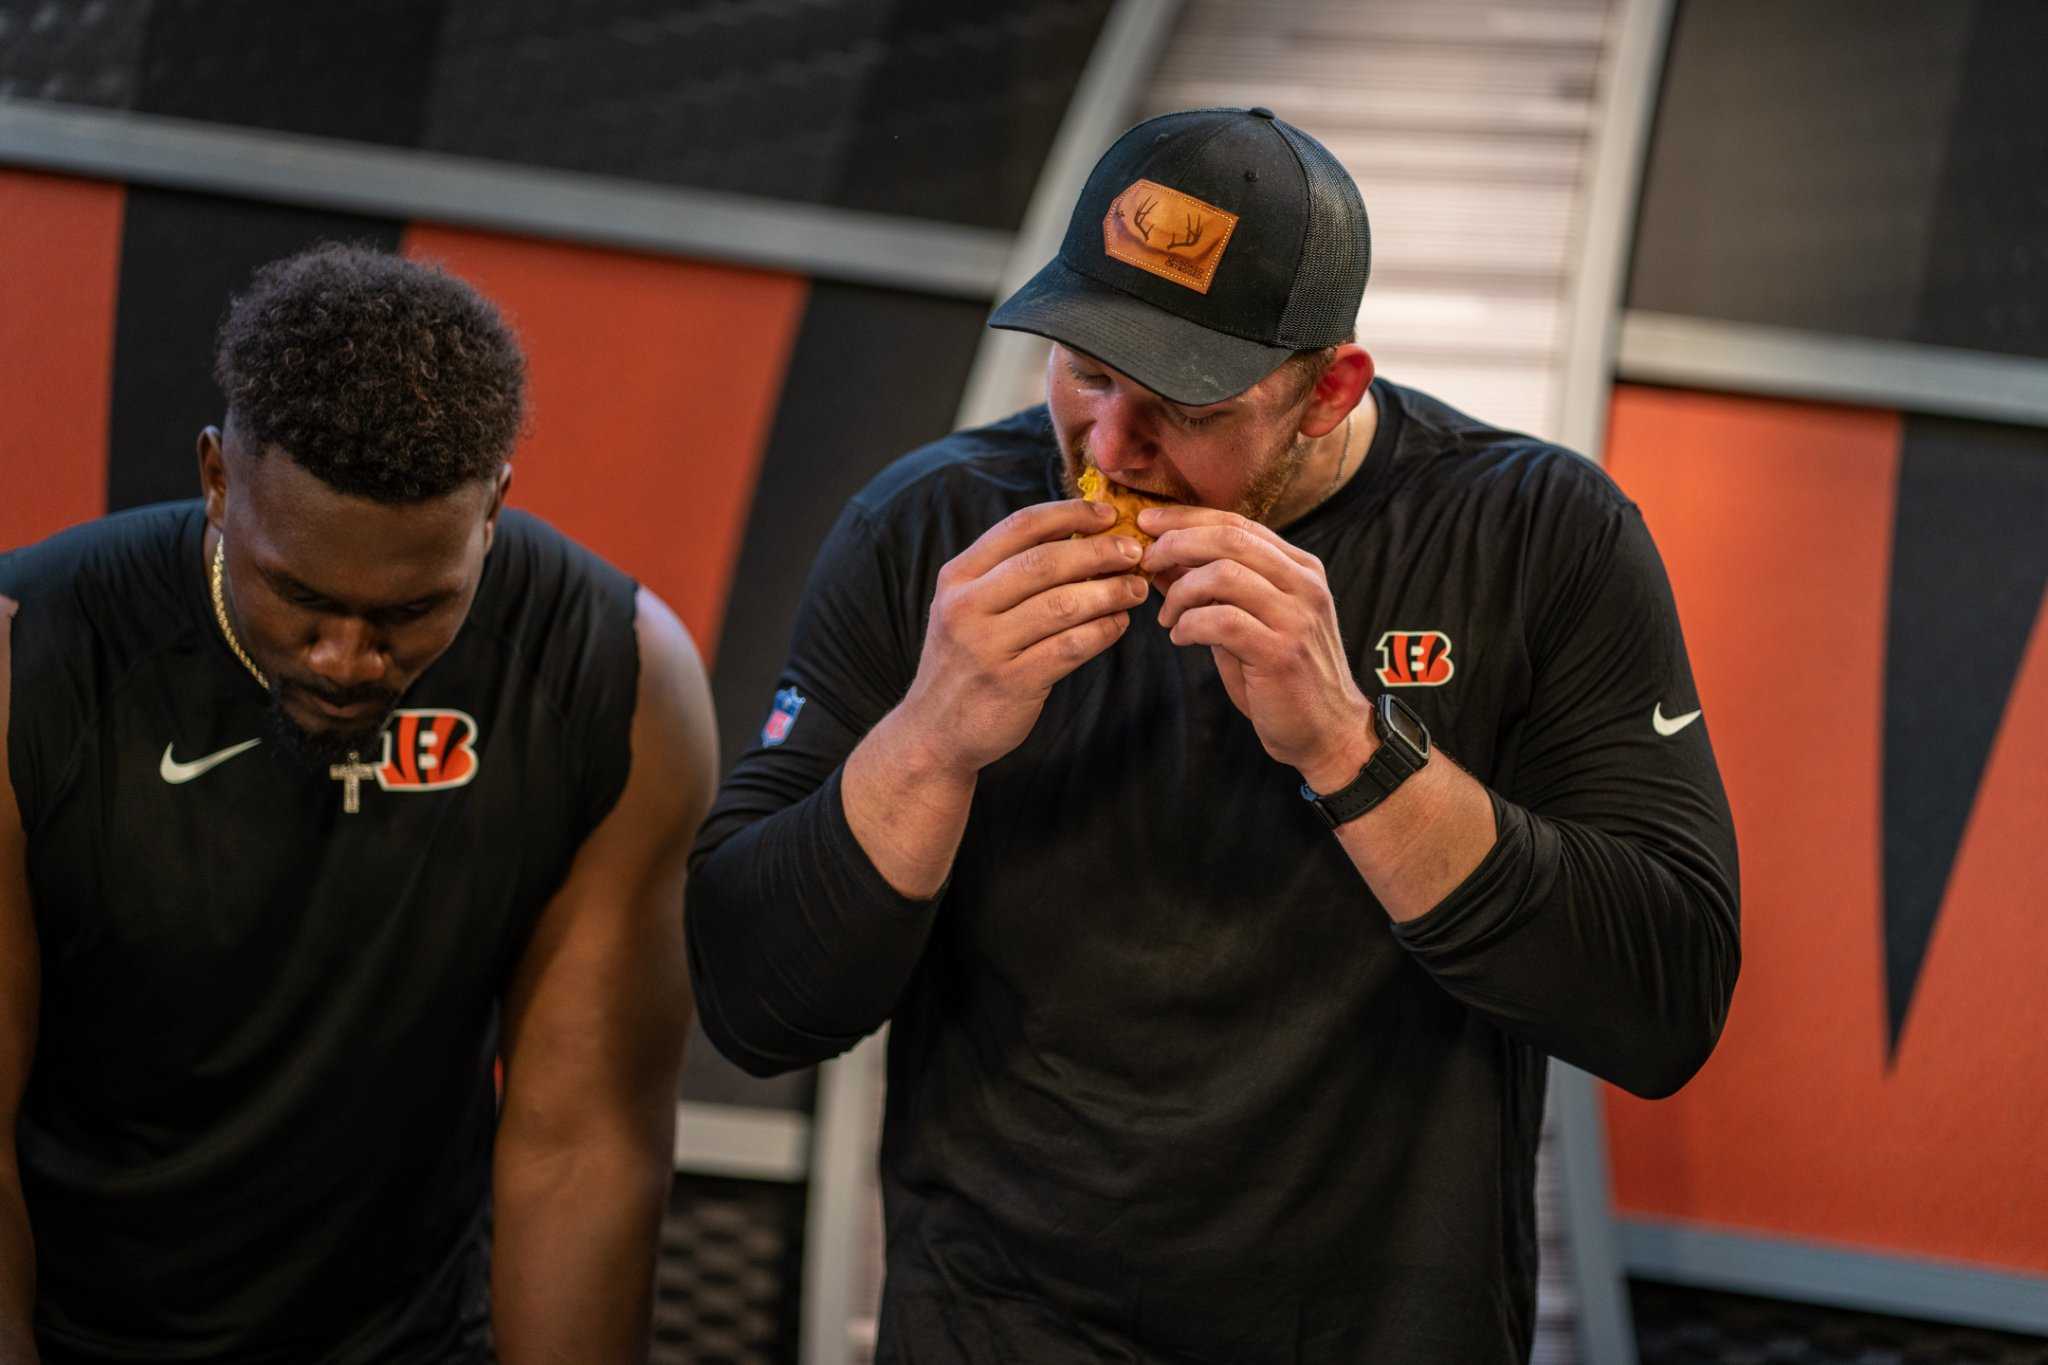 Bengals News (8/16): New Bengals try Skyline Chili for the first